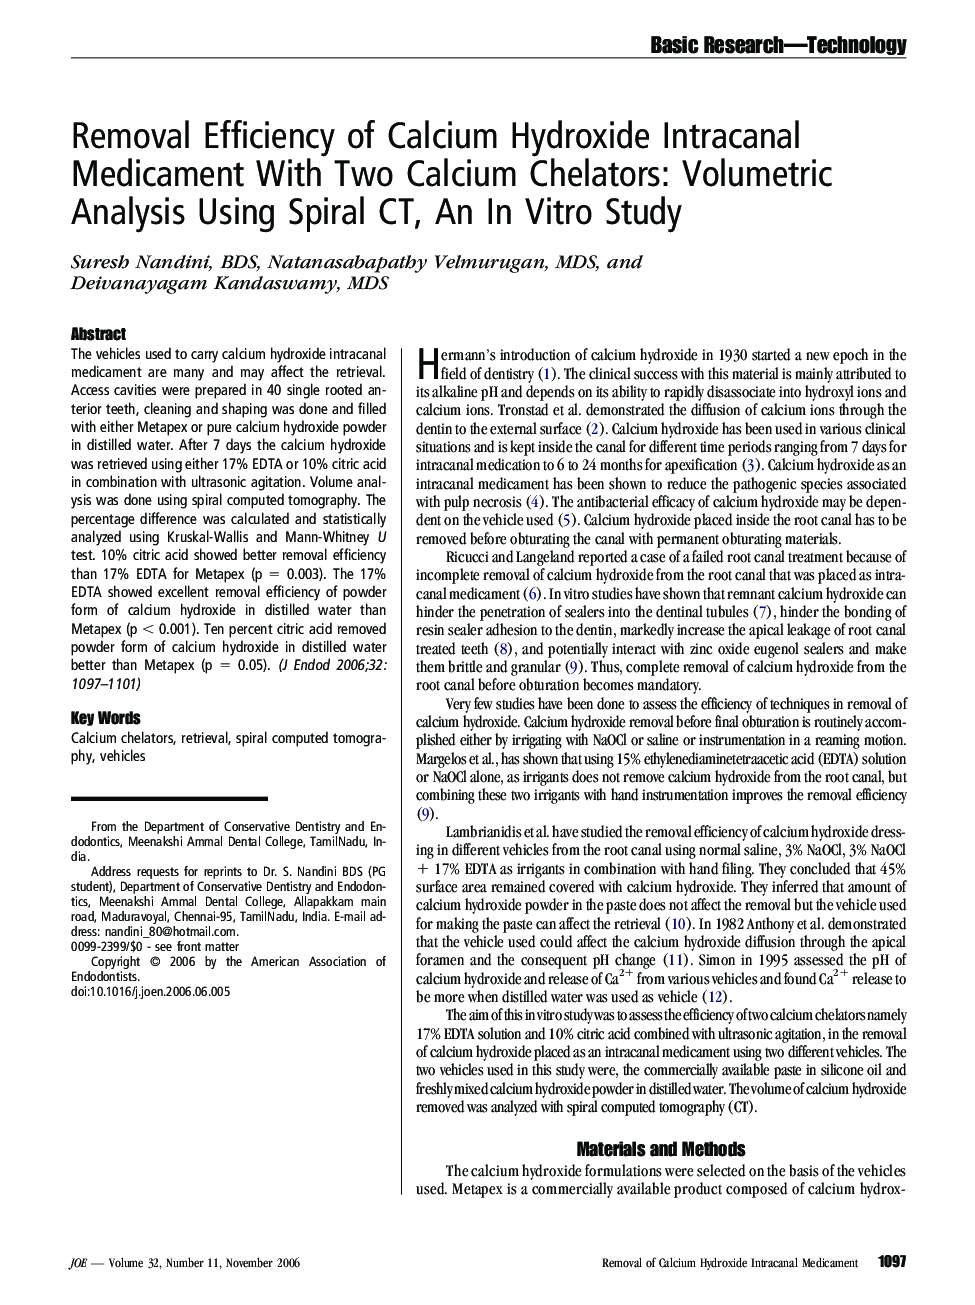 Removal Efficiency of Calcium Hydroxide Intracanal Medicament With Two Calcium Chelators: Volumetric Analysis Using Spiral CT, An In Vitro Study